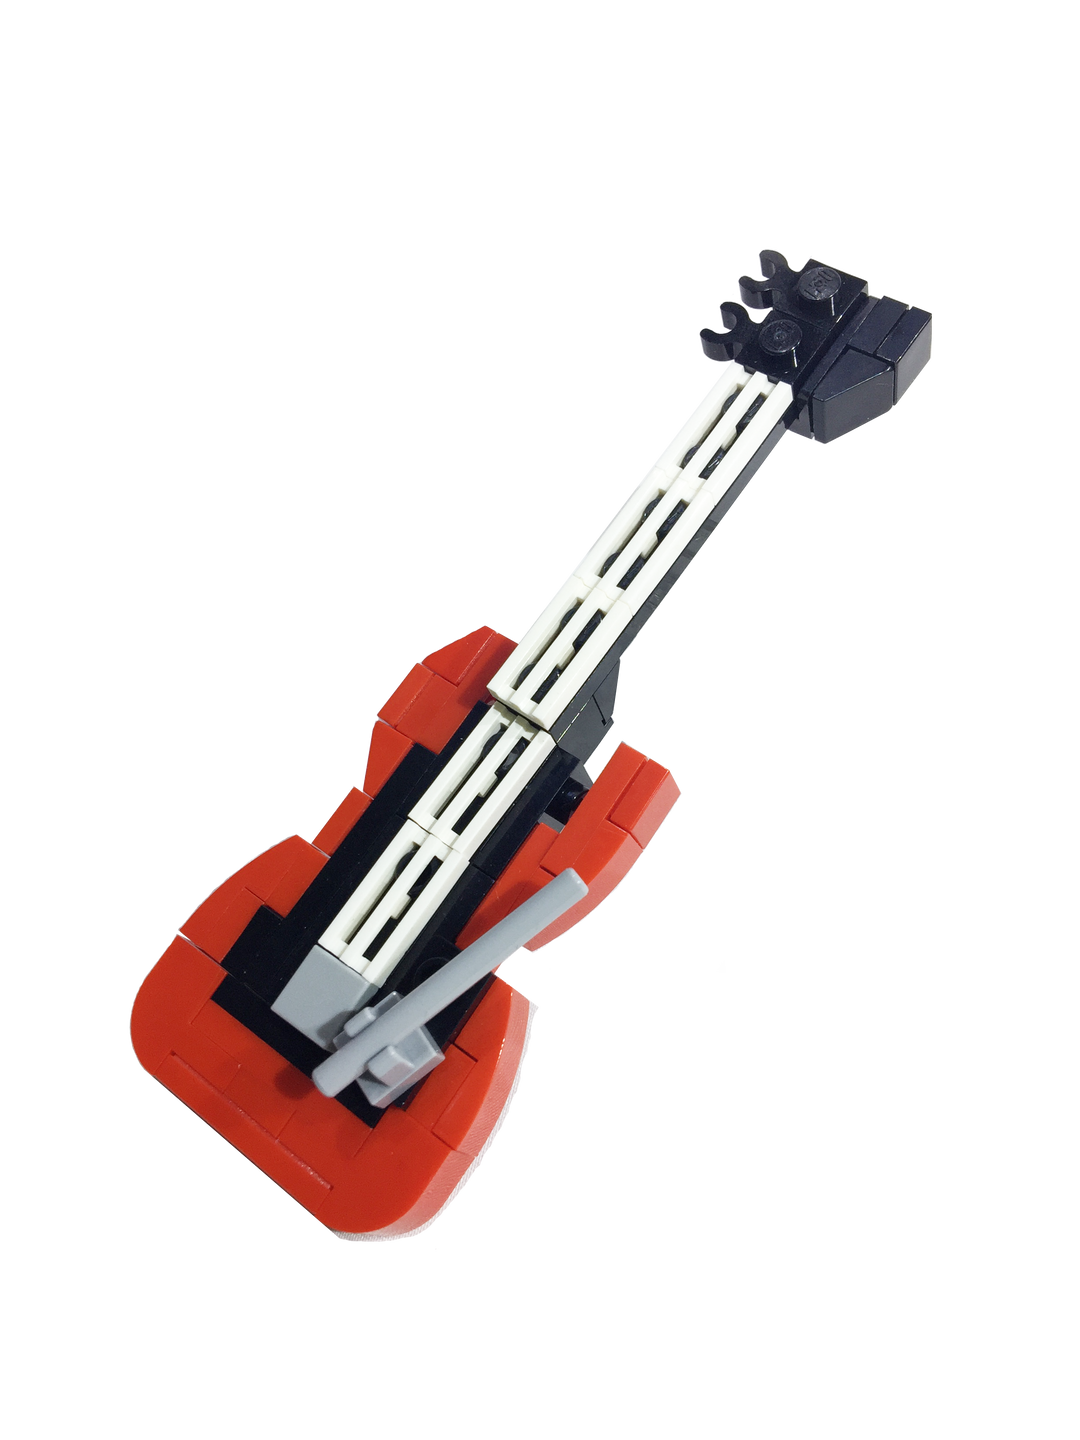 New! Lego Acoustic Guitar Set of 3 with Stand Minfigure Rock n